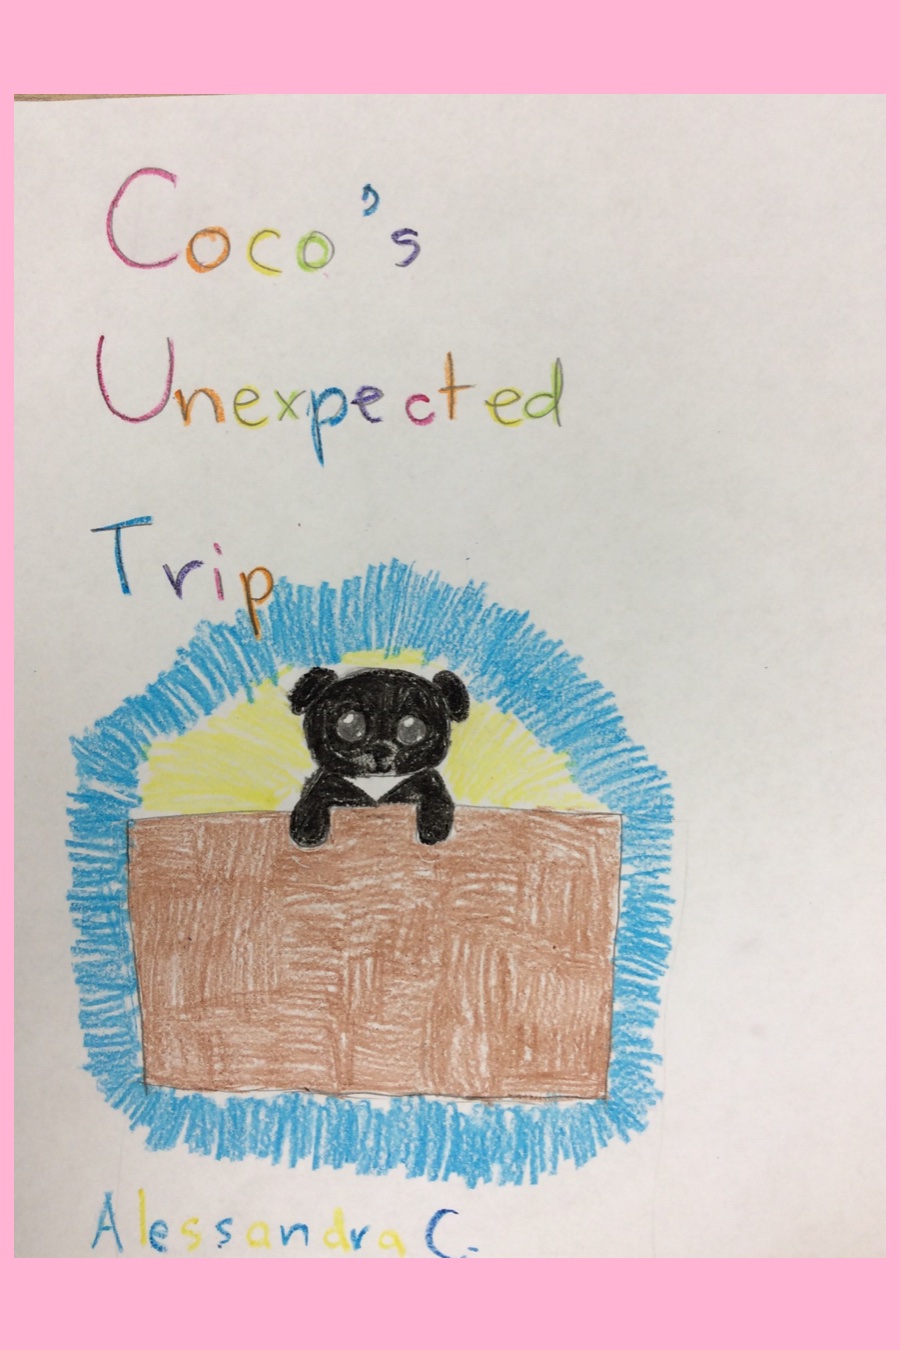 Coco’s Unexpected Trip by Alessandra C